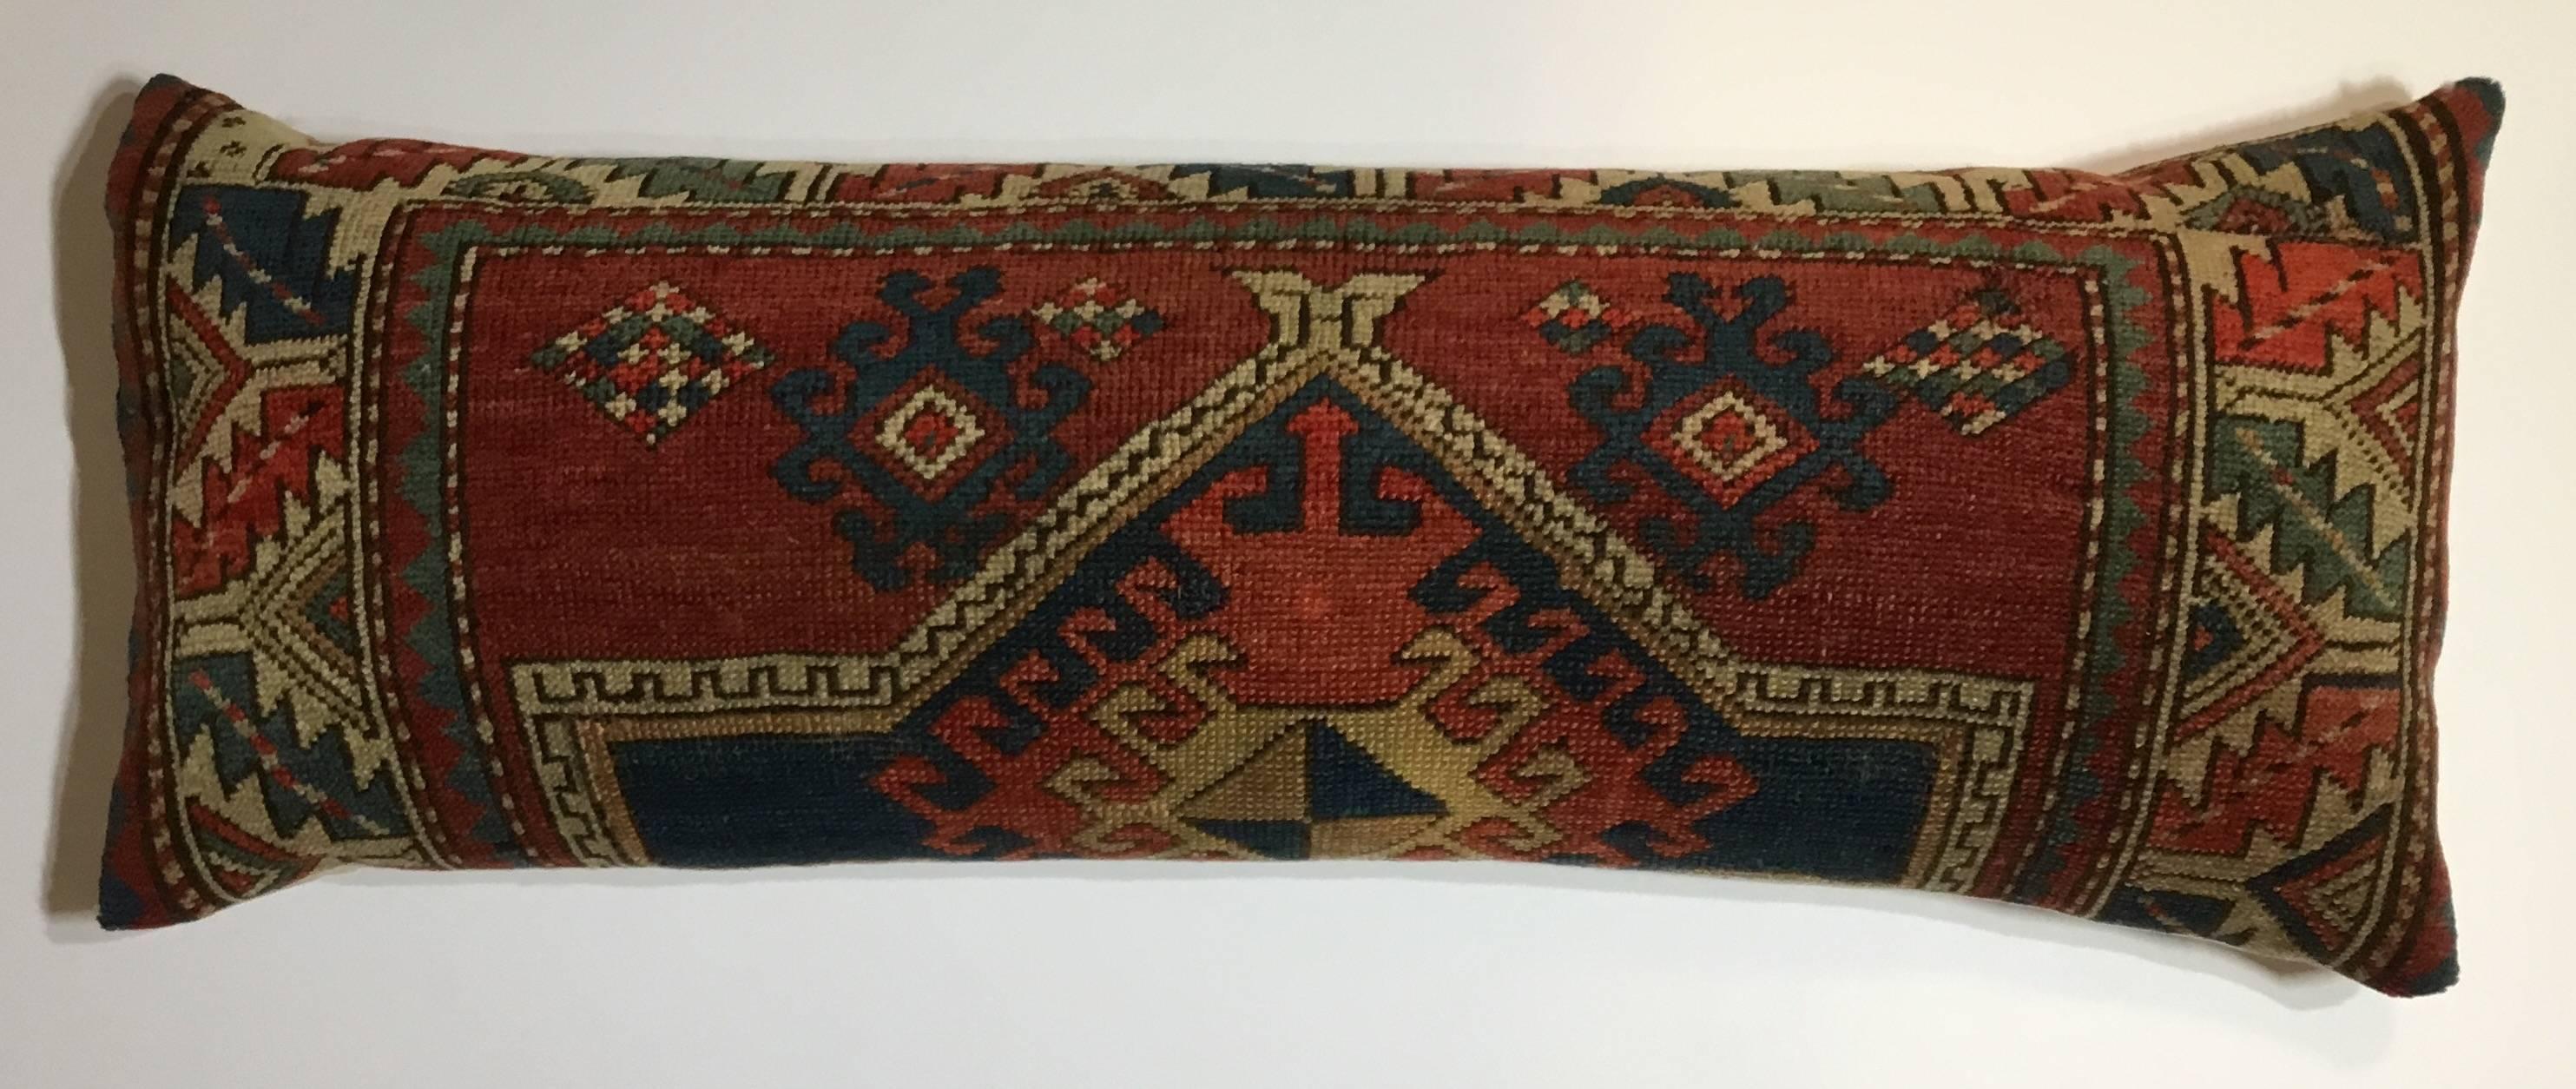 Beautiful pillow made of hand woven Caucasian rug fragment,fantastic colorful 
Geometric motifs.
Very minor professional repair,very clean with Frash insert,cotton backing .
Will enjoy for Many years to come .
